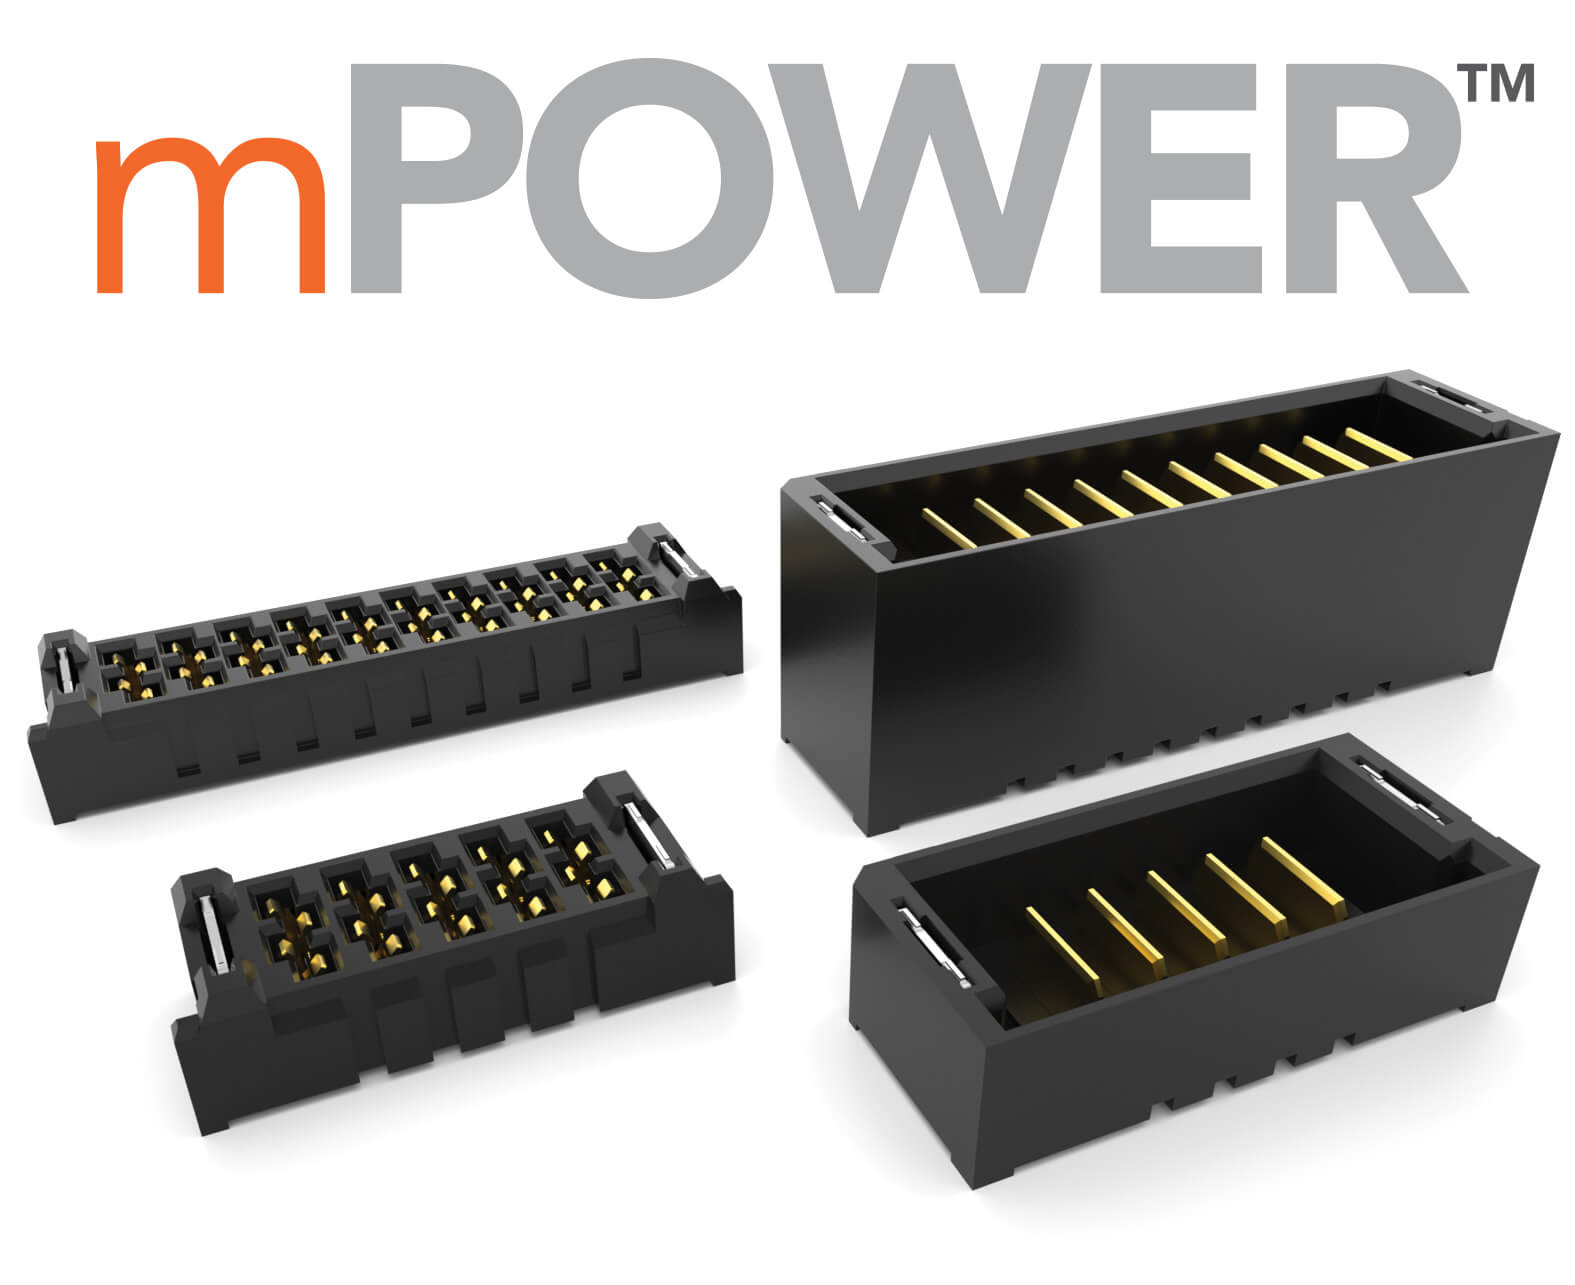 Connector Voltage and Power Rating 101 - The Samtec Blog